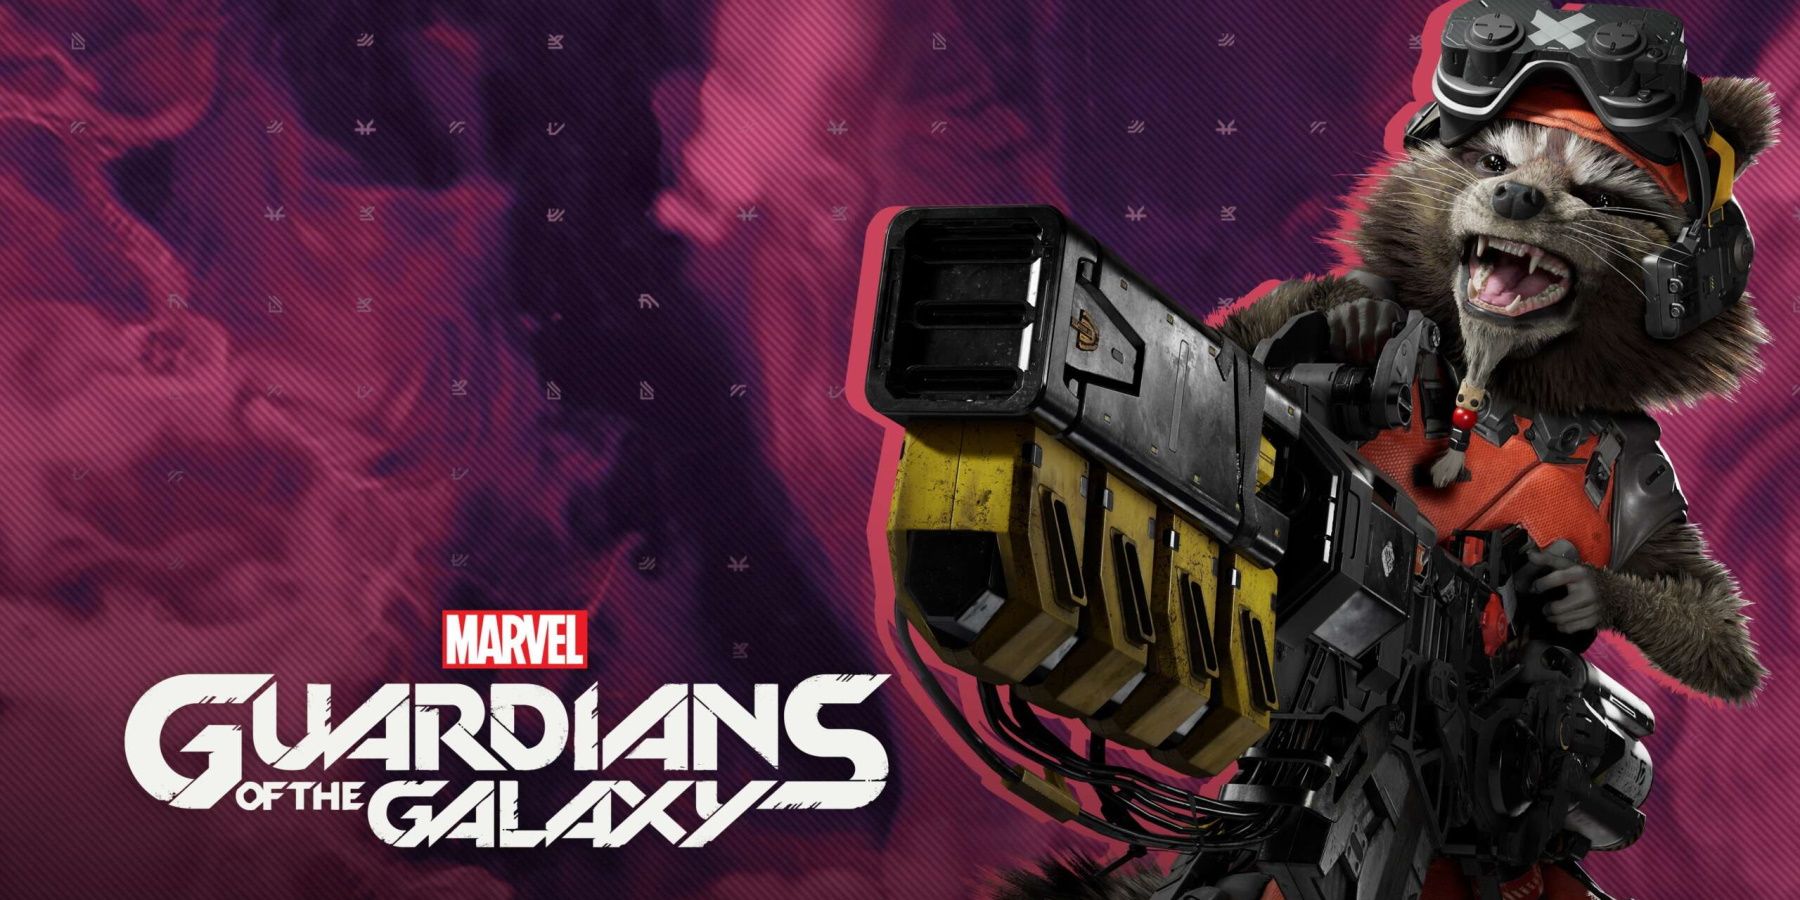 Marvel's Guardians of the Galaxy rocket with gun promotional artwork